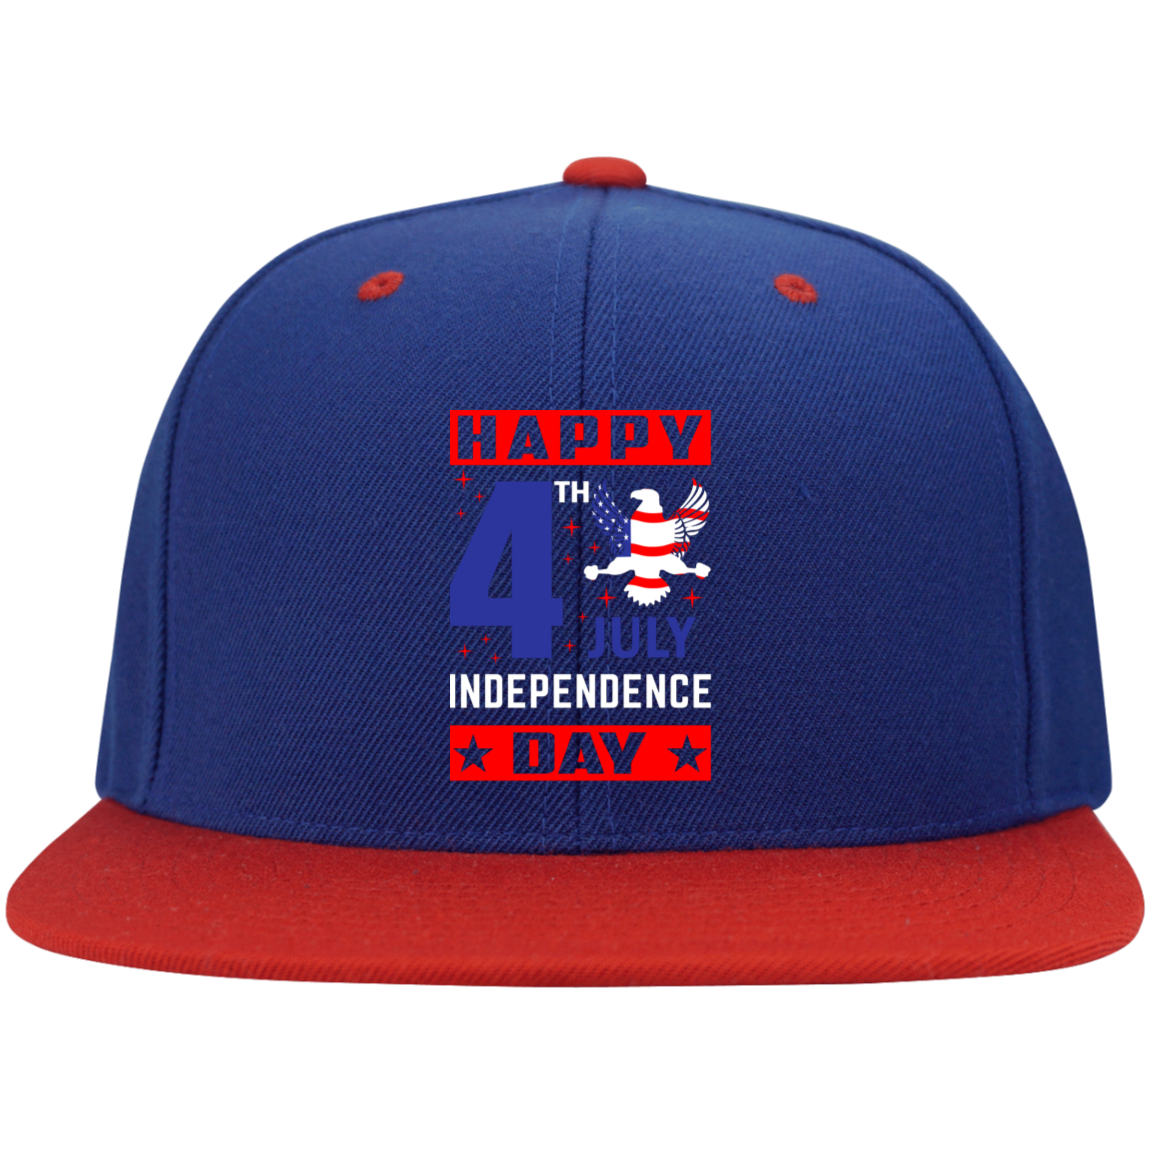 HAPPY 4th of JULY INDEPENDENCE  Flat Bill High-Profile Snapback Hat